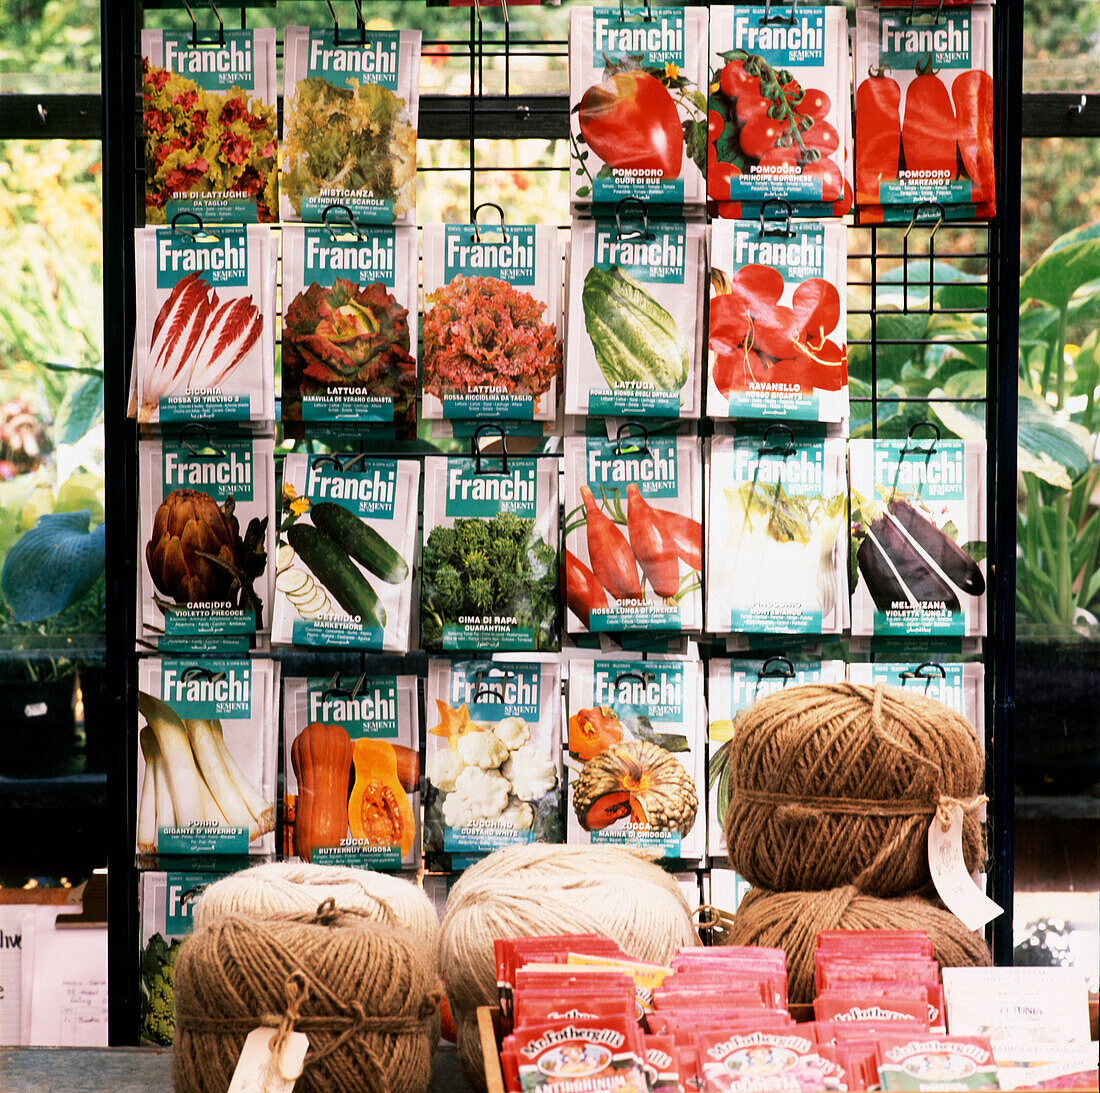 A rack of vegetable seeds displayed in a garden center